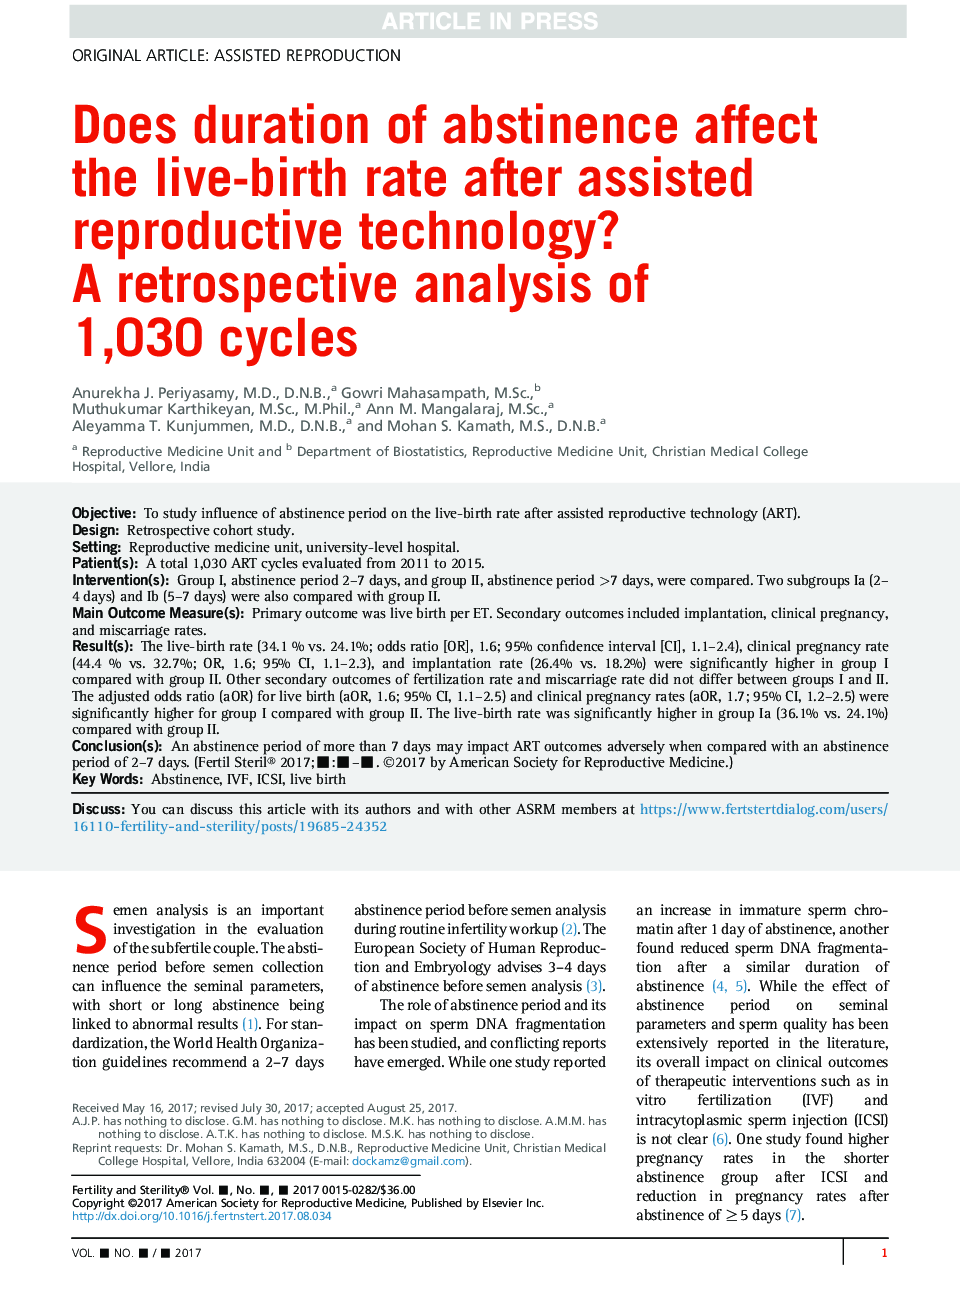 Does duration of abstinence affect the live-birth rate after assisted reproductive technology? AÂ retrospective analysis of 1,030 cycles